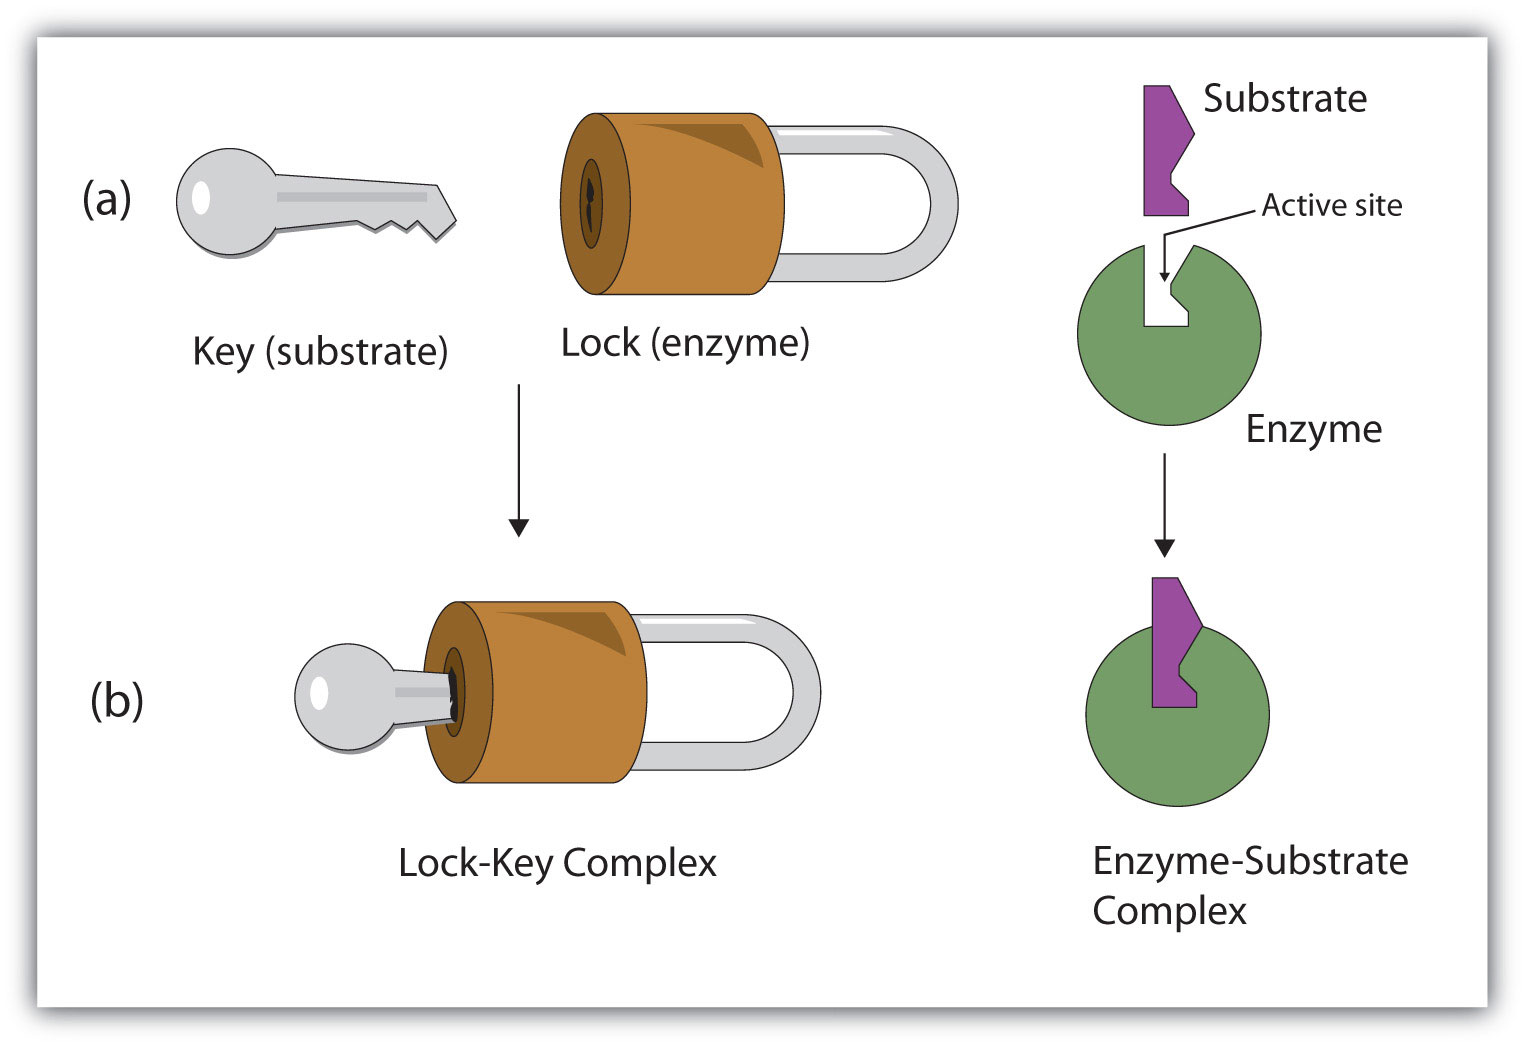 <p>Lock (enzyme) and Key (substrate)</p>